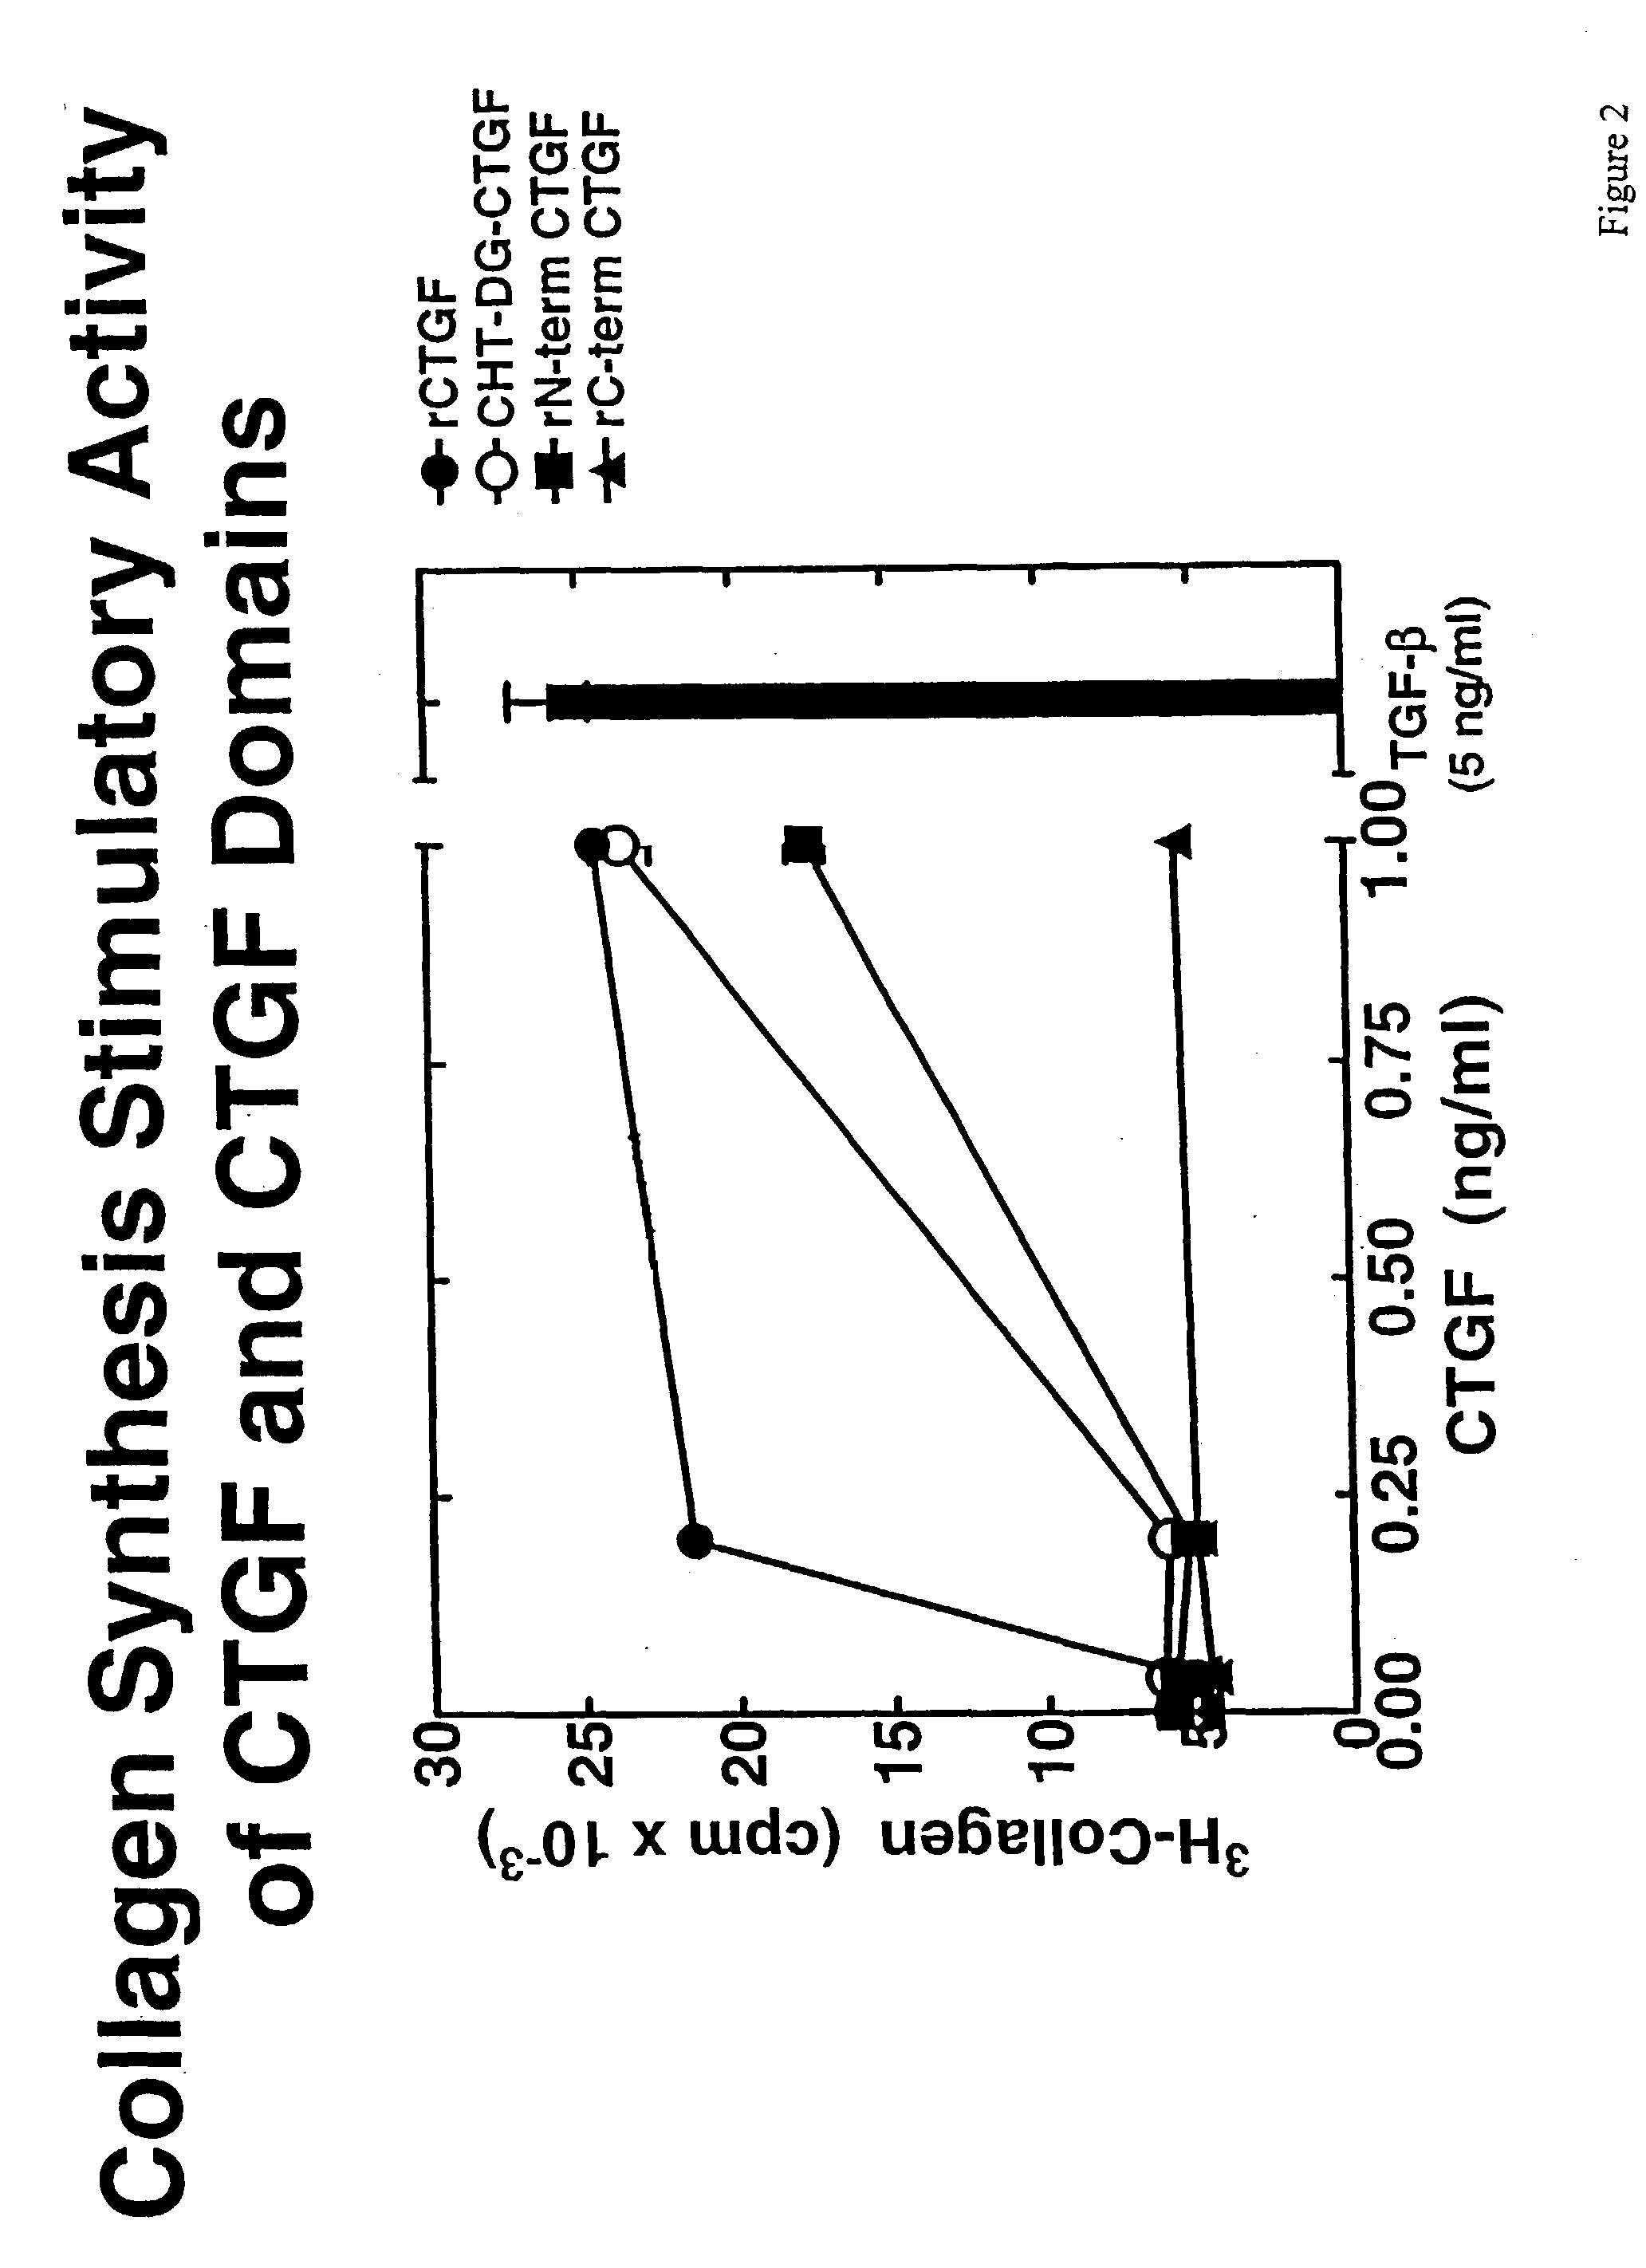 Antibodies directed to fragments of connective tissue growth factor (CTGF) polypeptide and methods and uses thereof